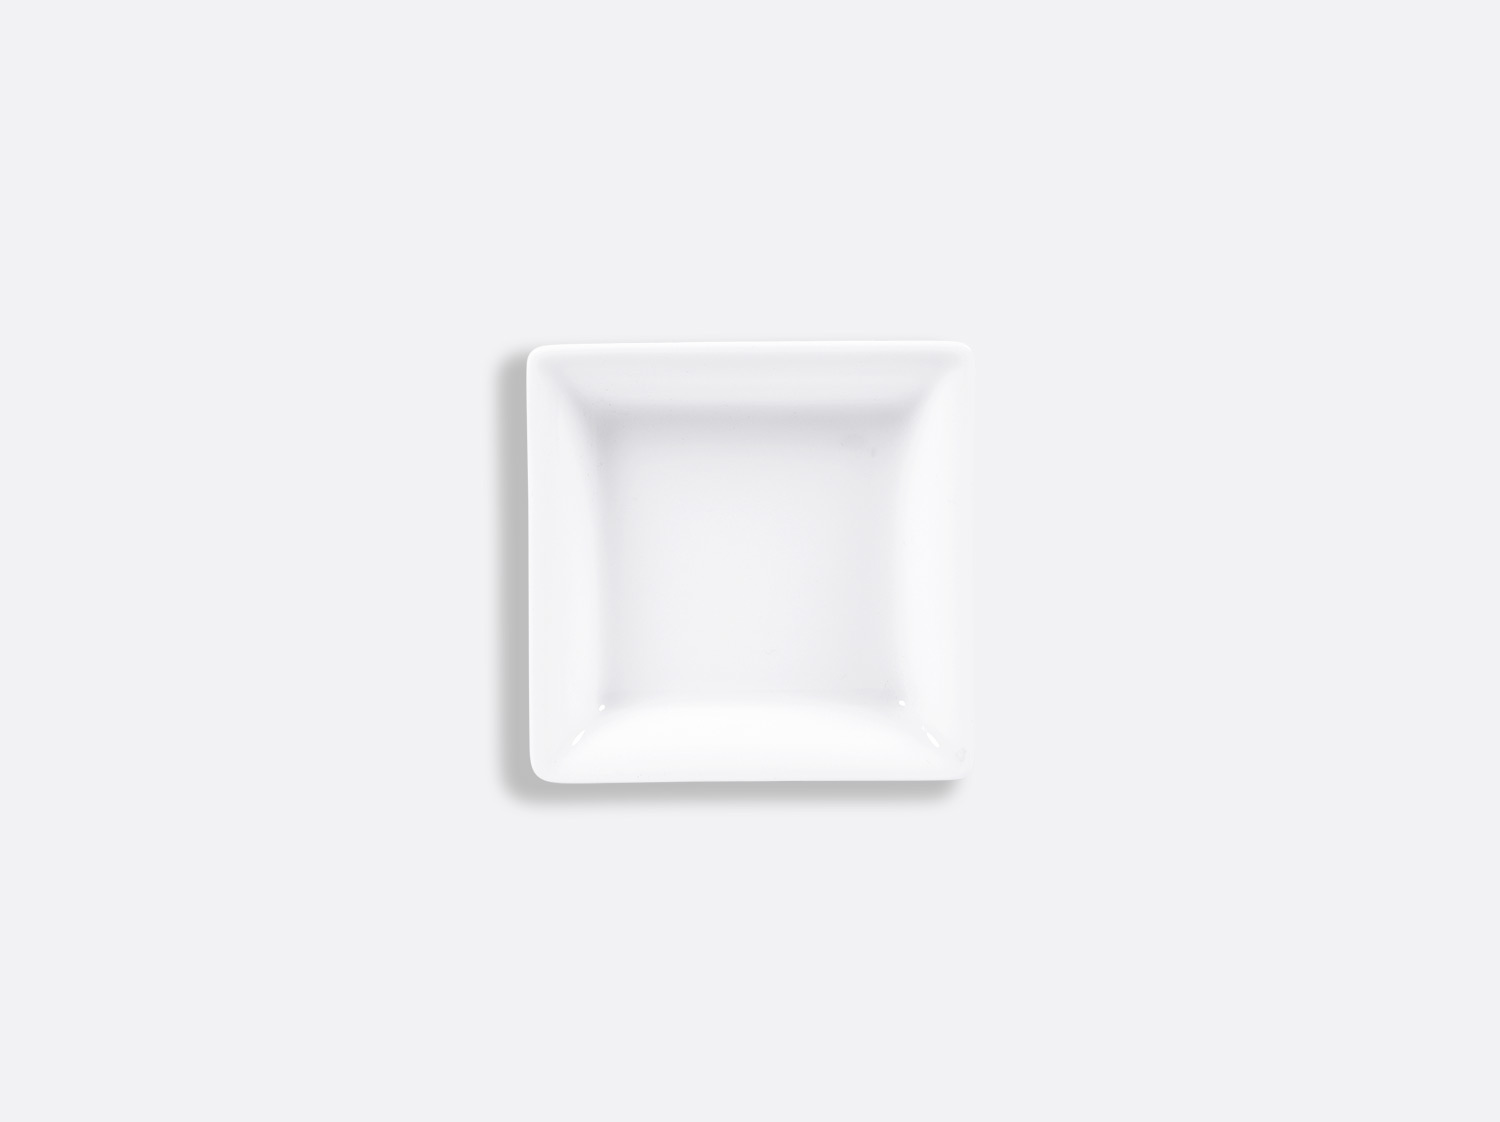 China Square ashtray 3.1" x 3.1" of the collection Fantaisies blanches | Bernardaud